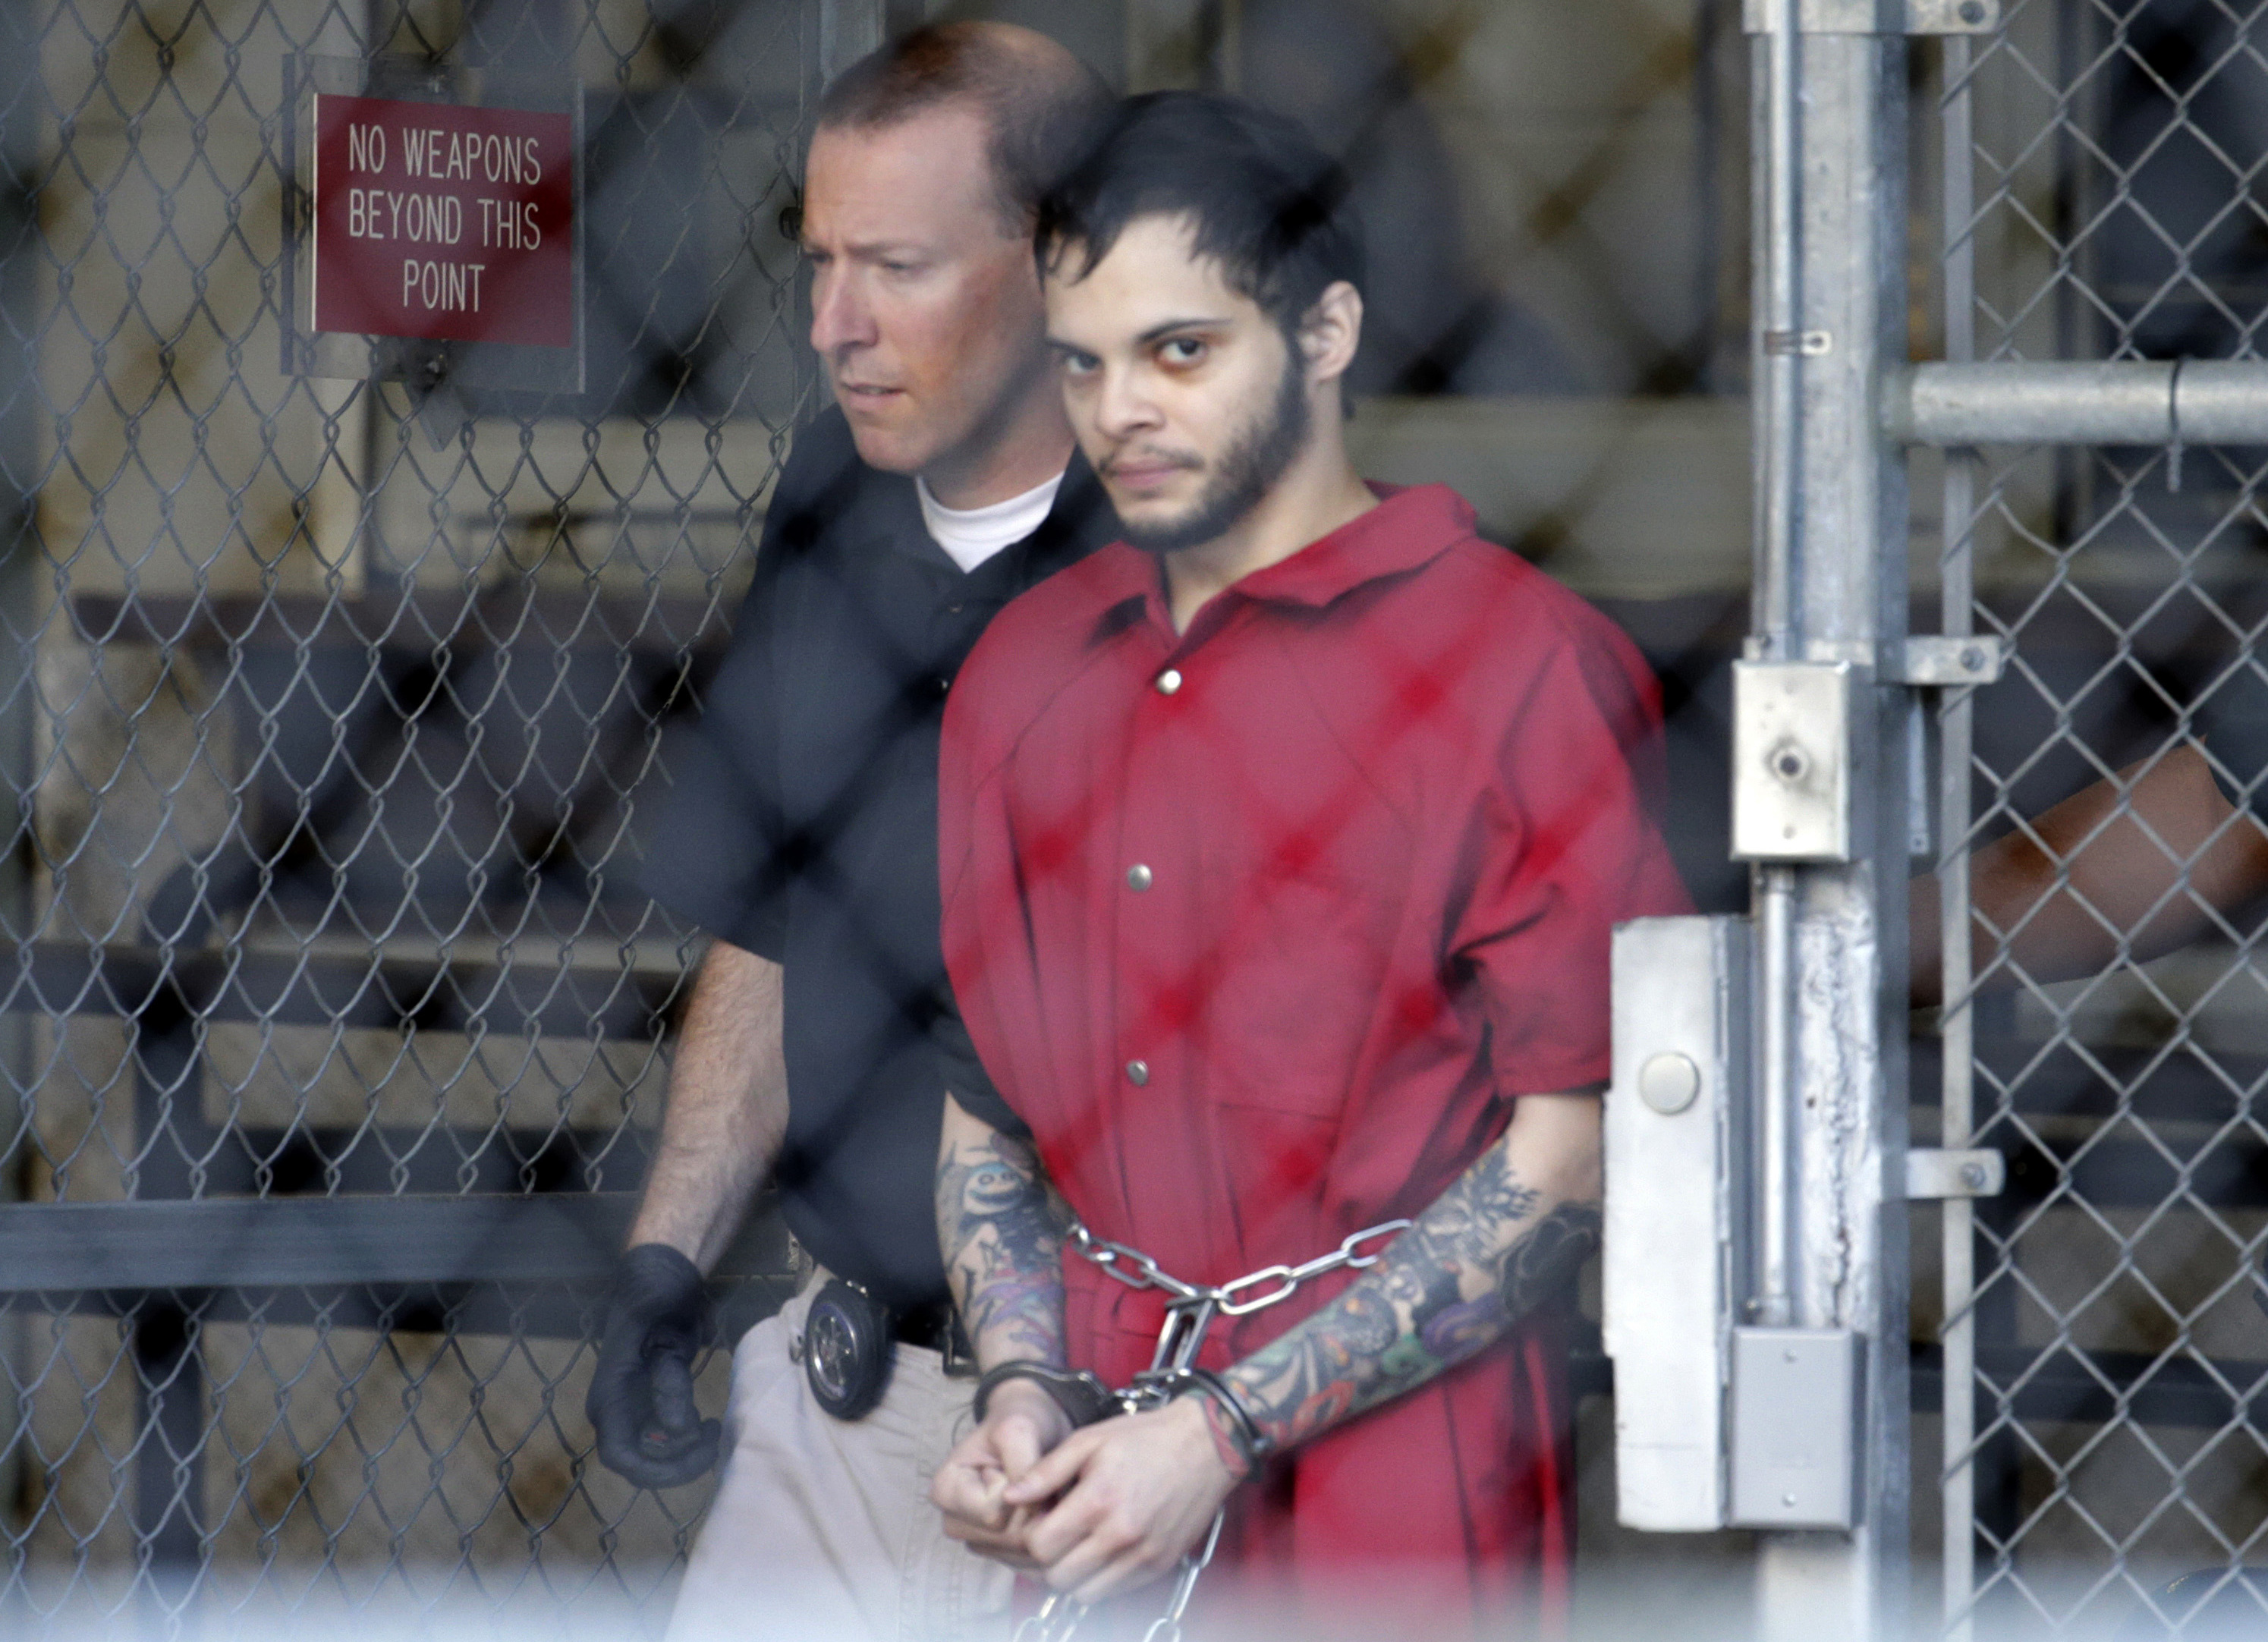 Esteban Santiago leaves the Broward County jail for a hearing in federal court on Jan. 17, 2017, in Fort Lauderdale, Fla. Santiago has been sentenced to life in prison for a Jan. 6 shooting rampage at a Fort Lauderdale-Hollywood International Airport baggage claim area. (Photo by Lynne Sladky/Associated Press)